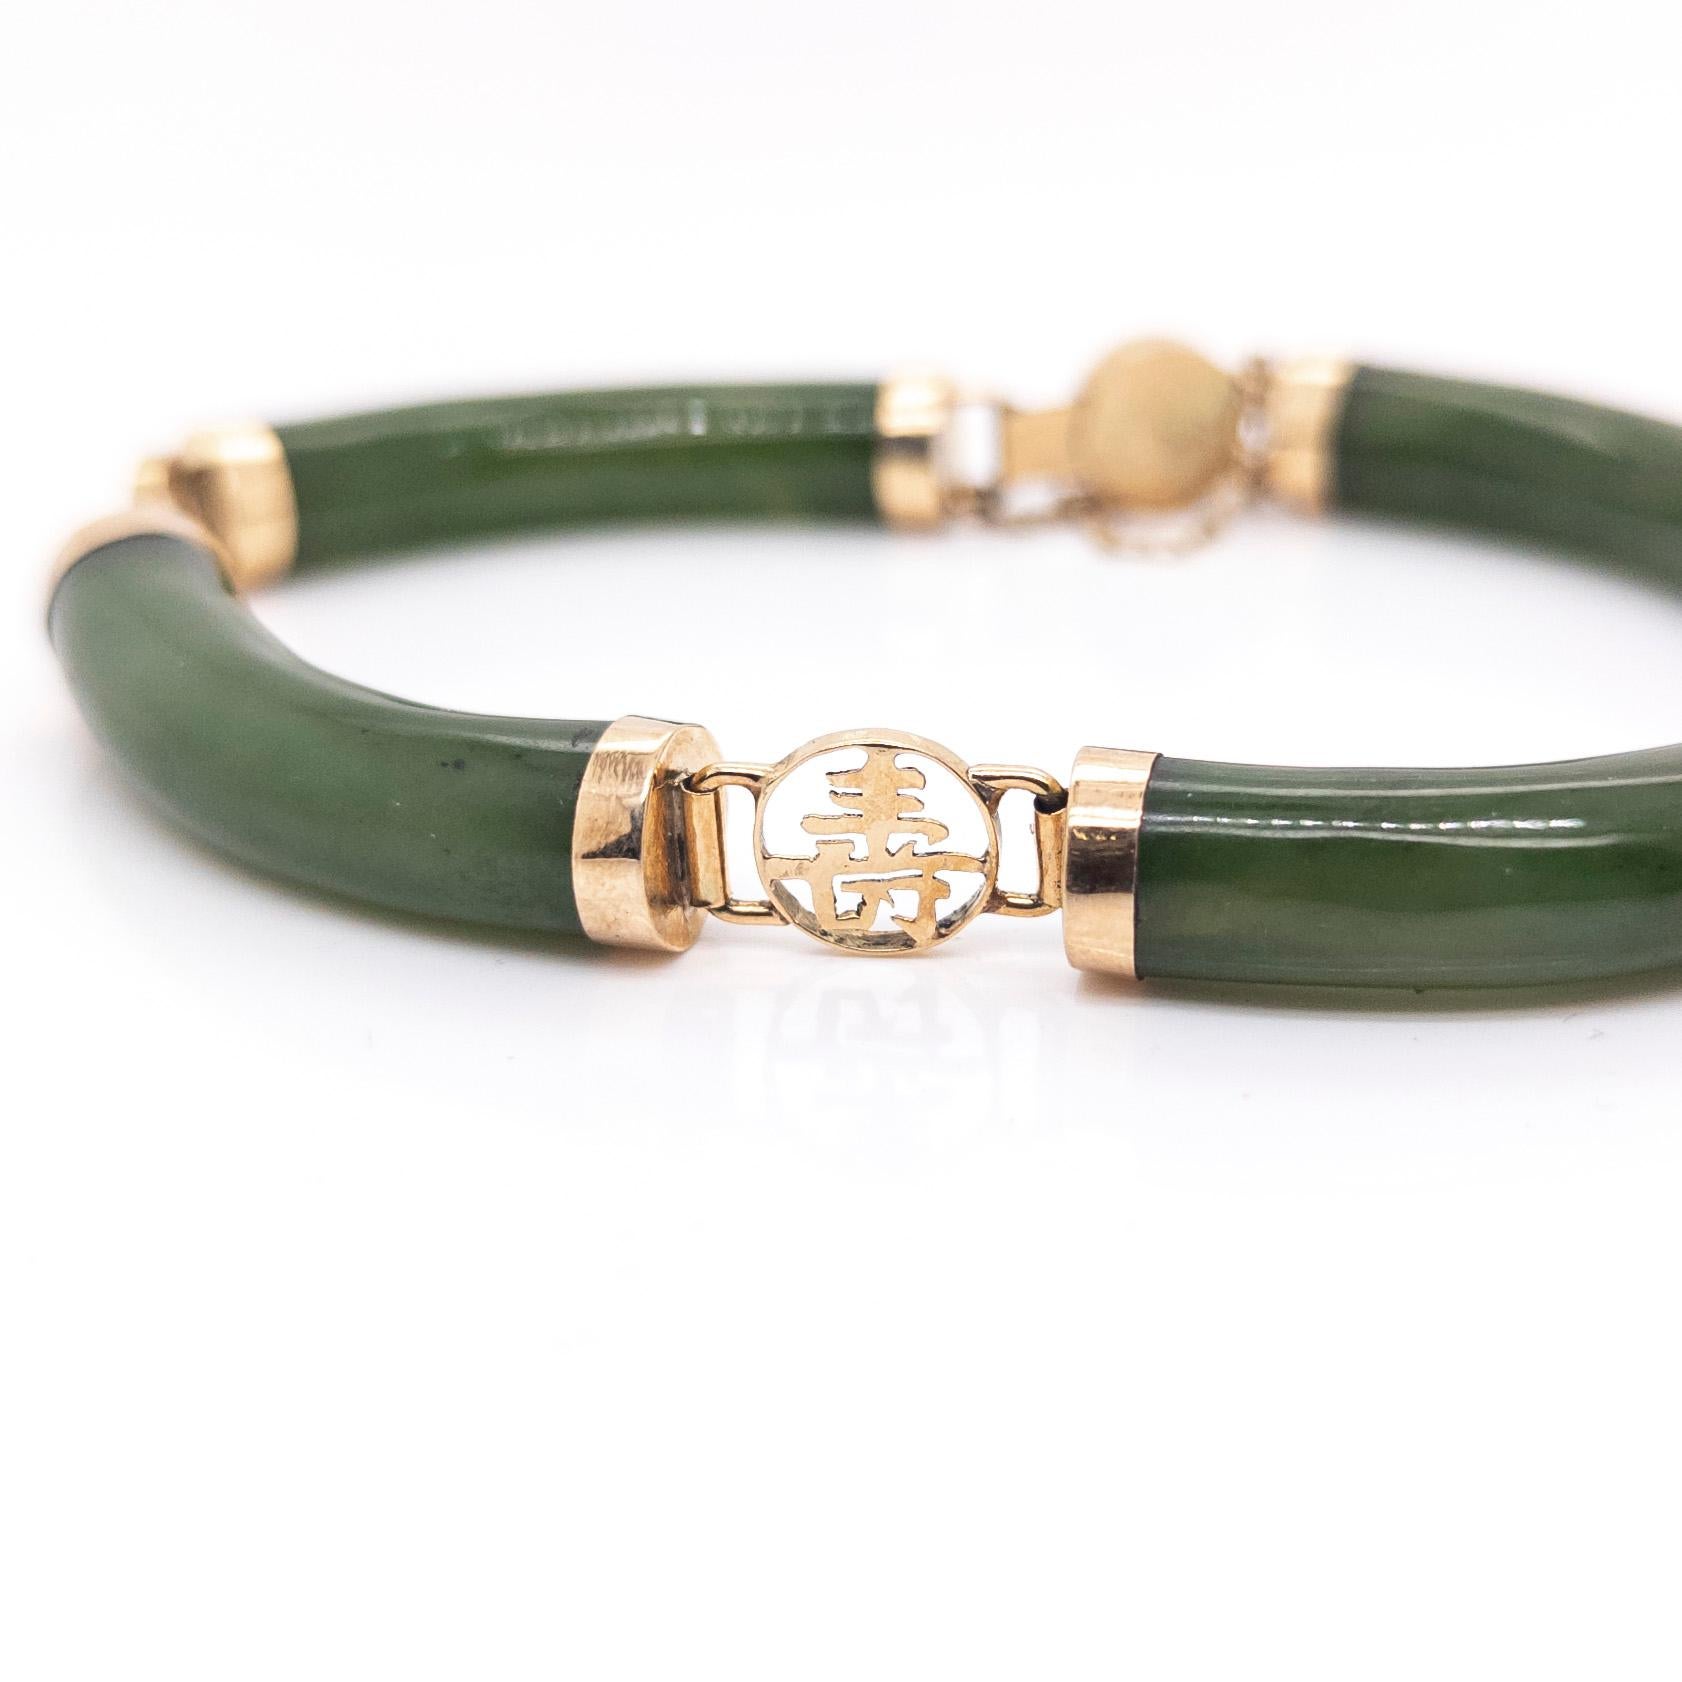 Vintage Chinese 14k Gold & Jade Bracelet with Auspicious Sanxing Characters For Sale 2